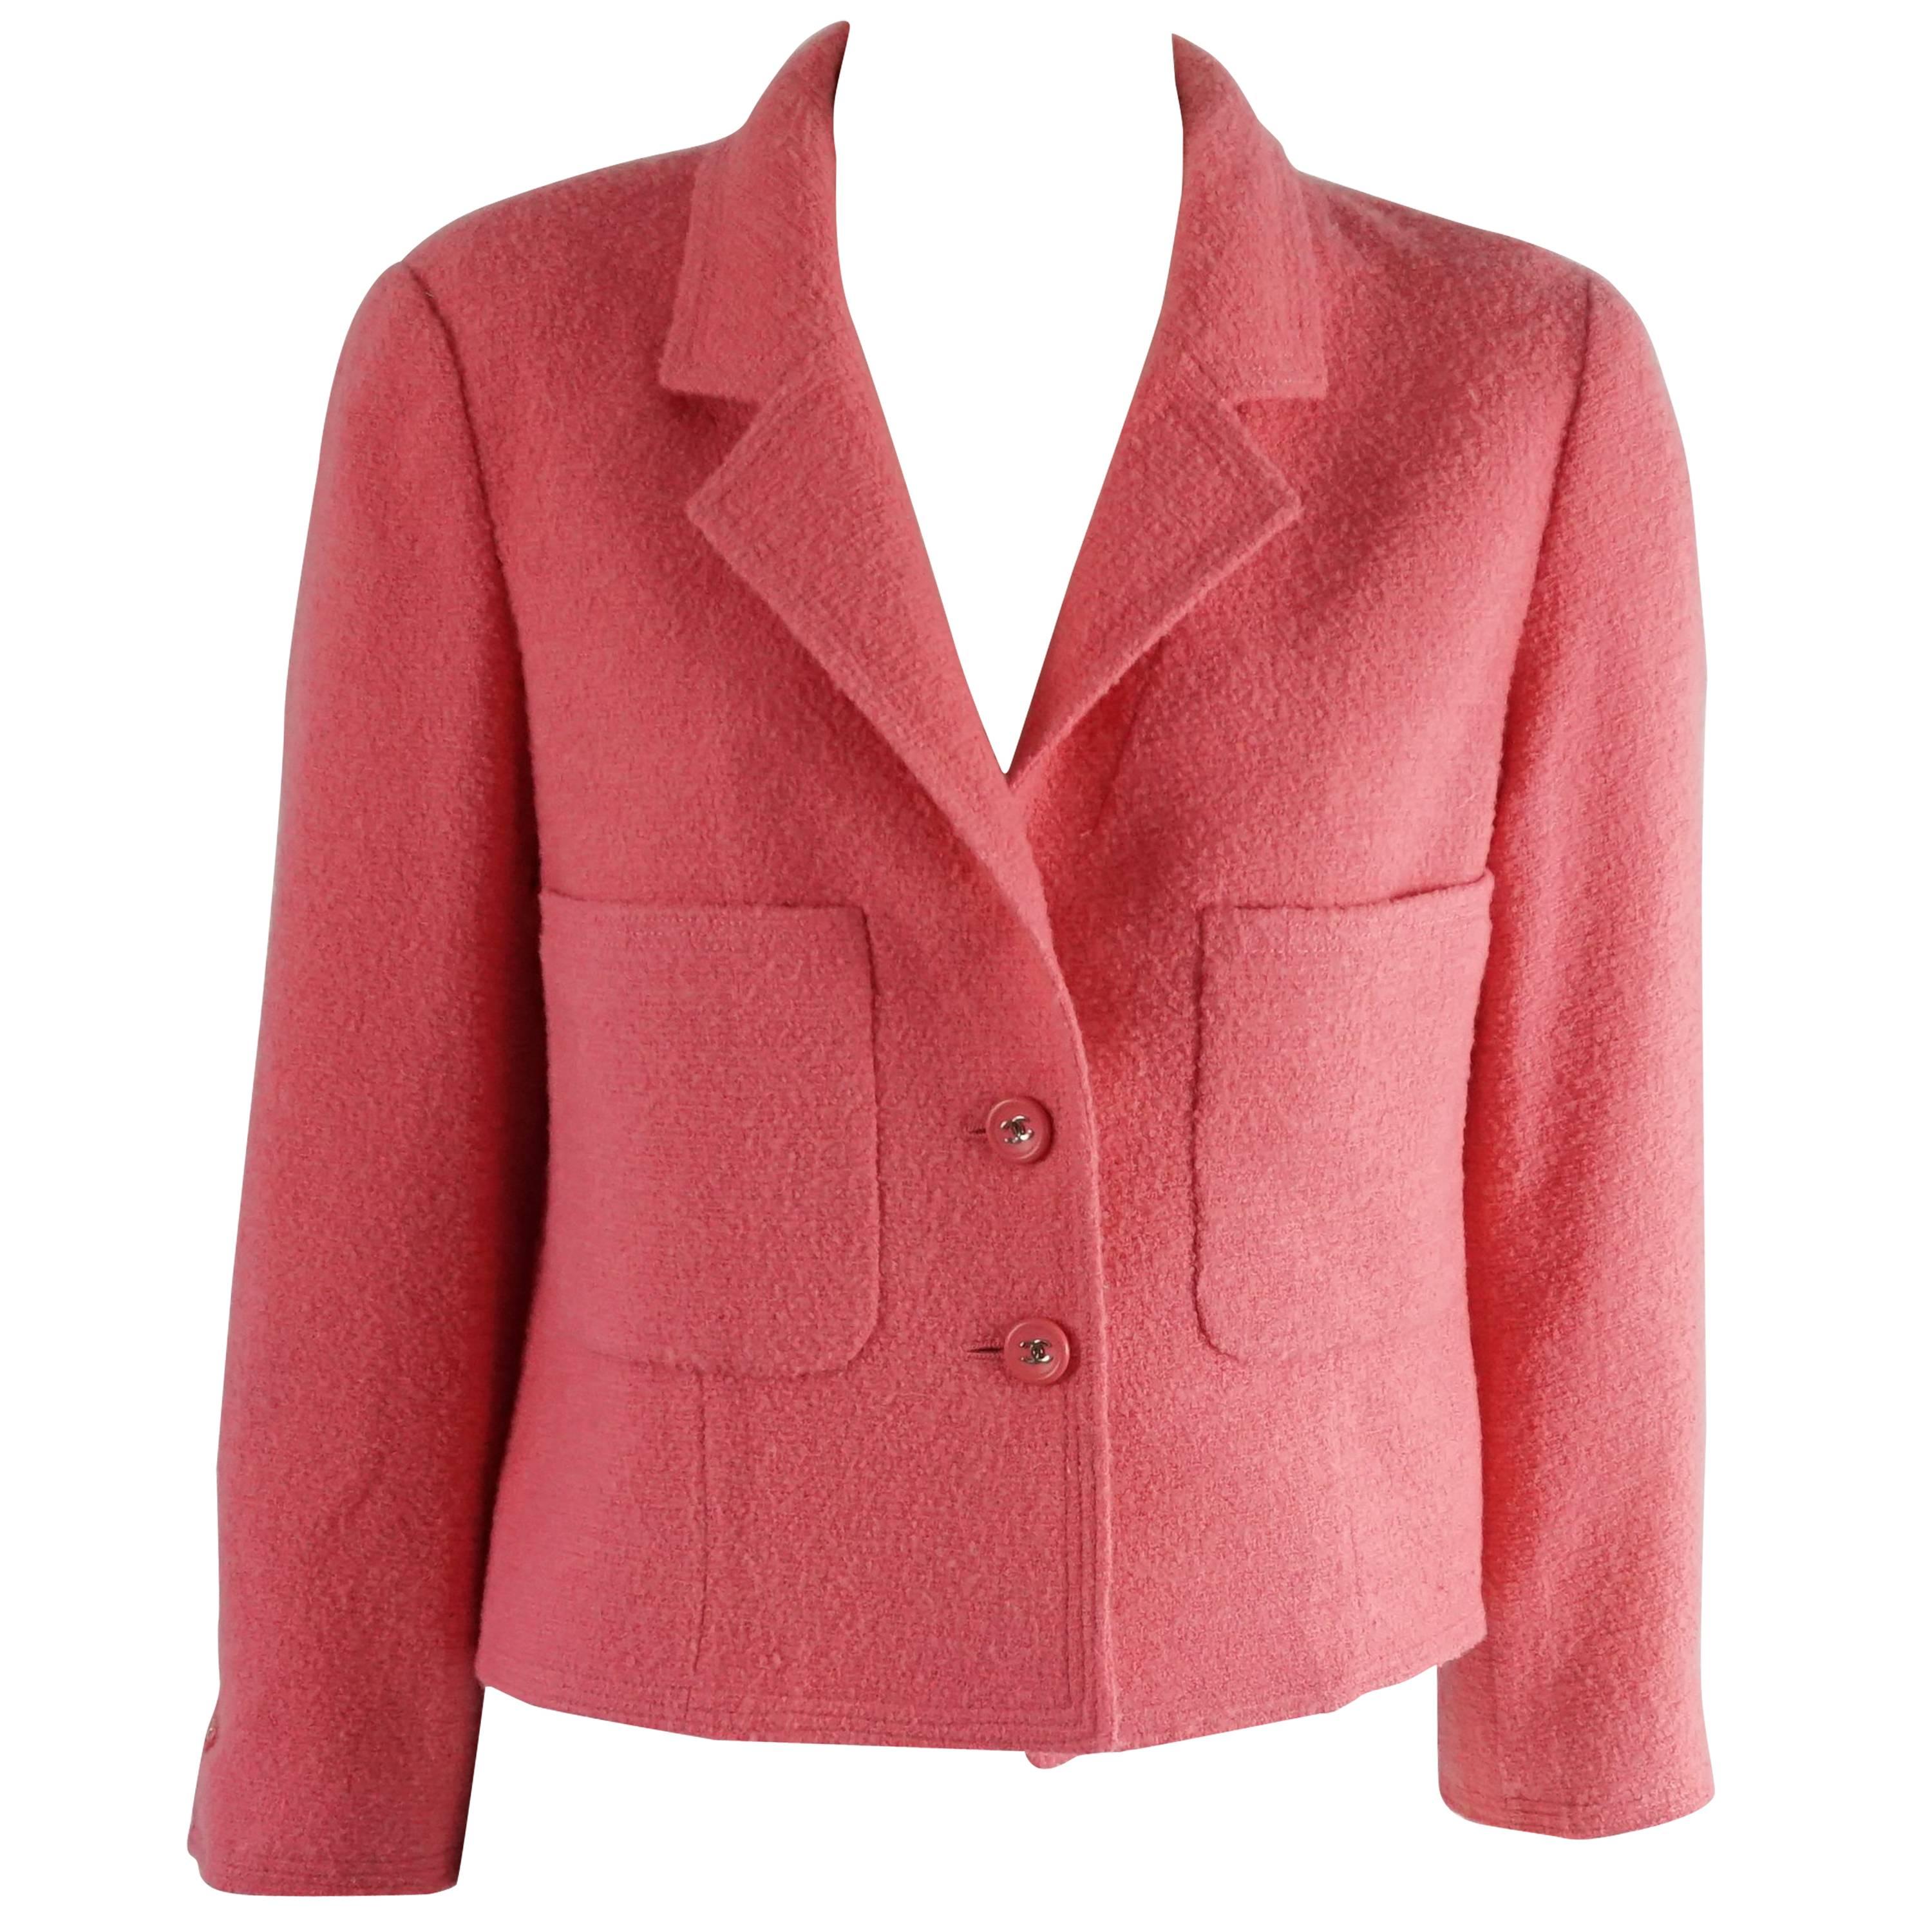 Chanel Pink Wool Crop Jacket with Pockets – 8 - 1980's